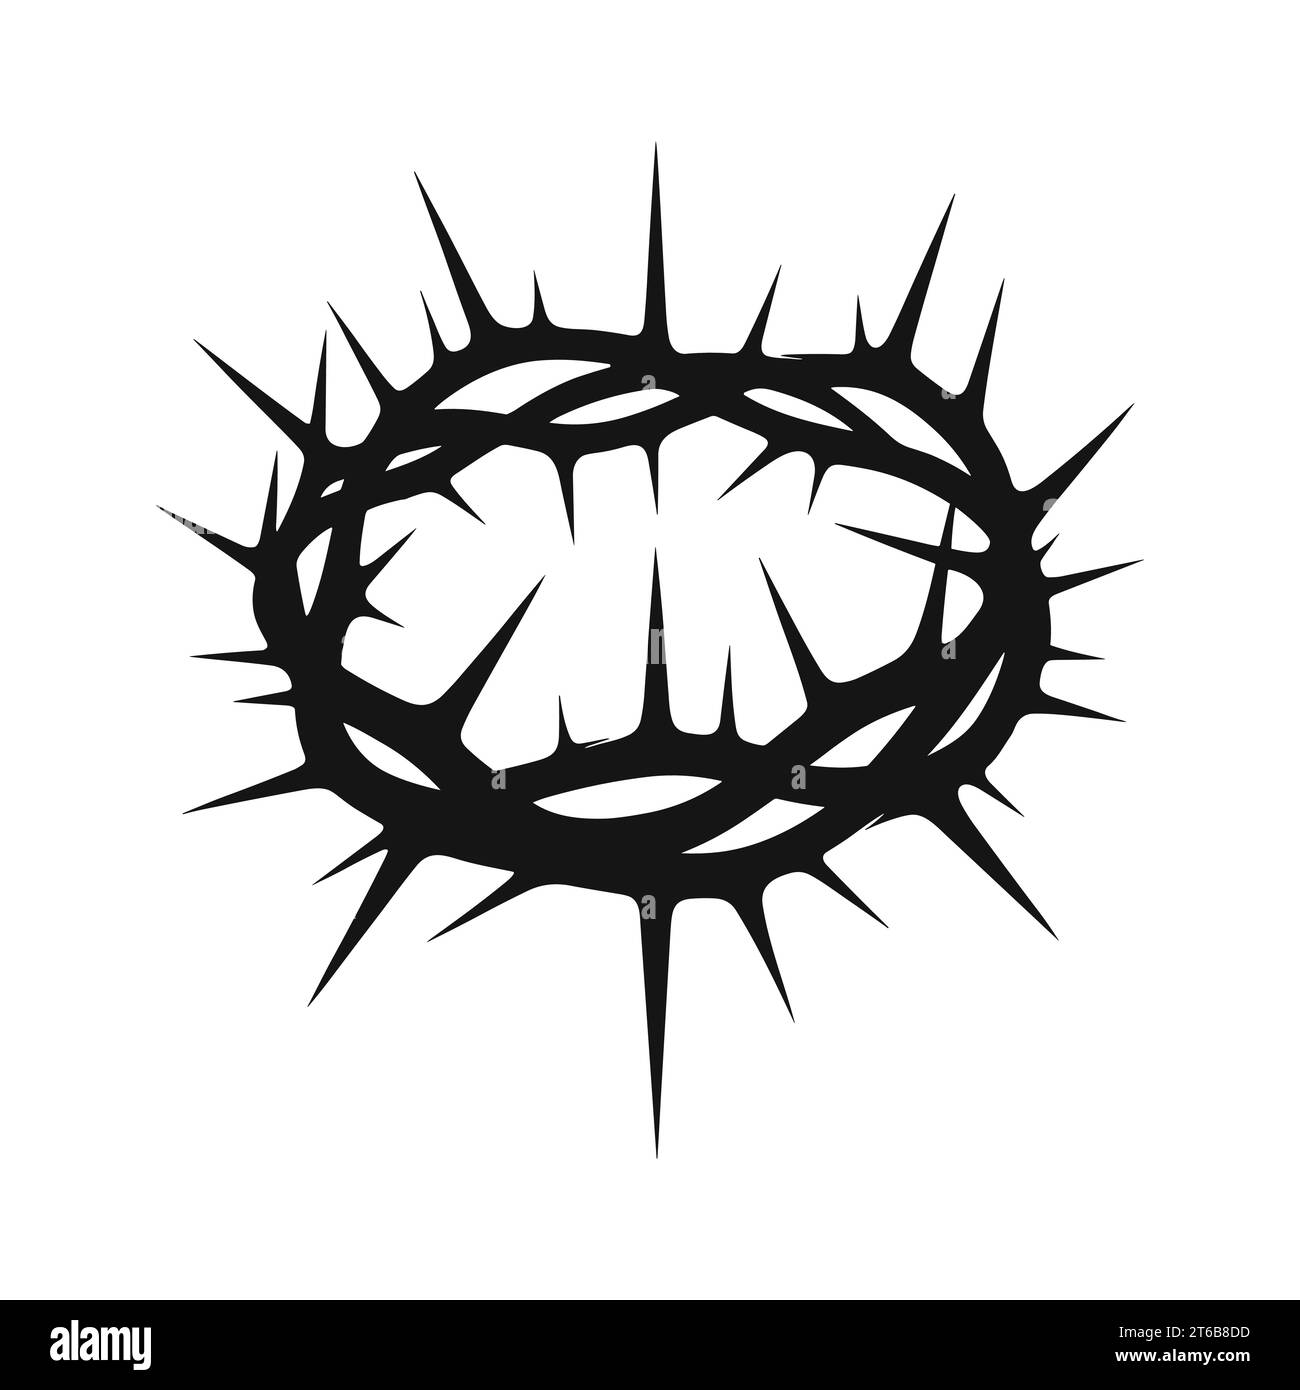 Crown of thorns icon. Black silhouette of a crown made of thorns on a ...